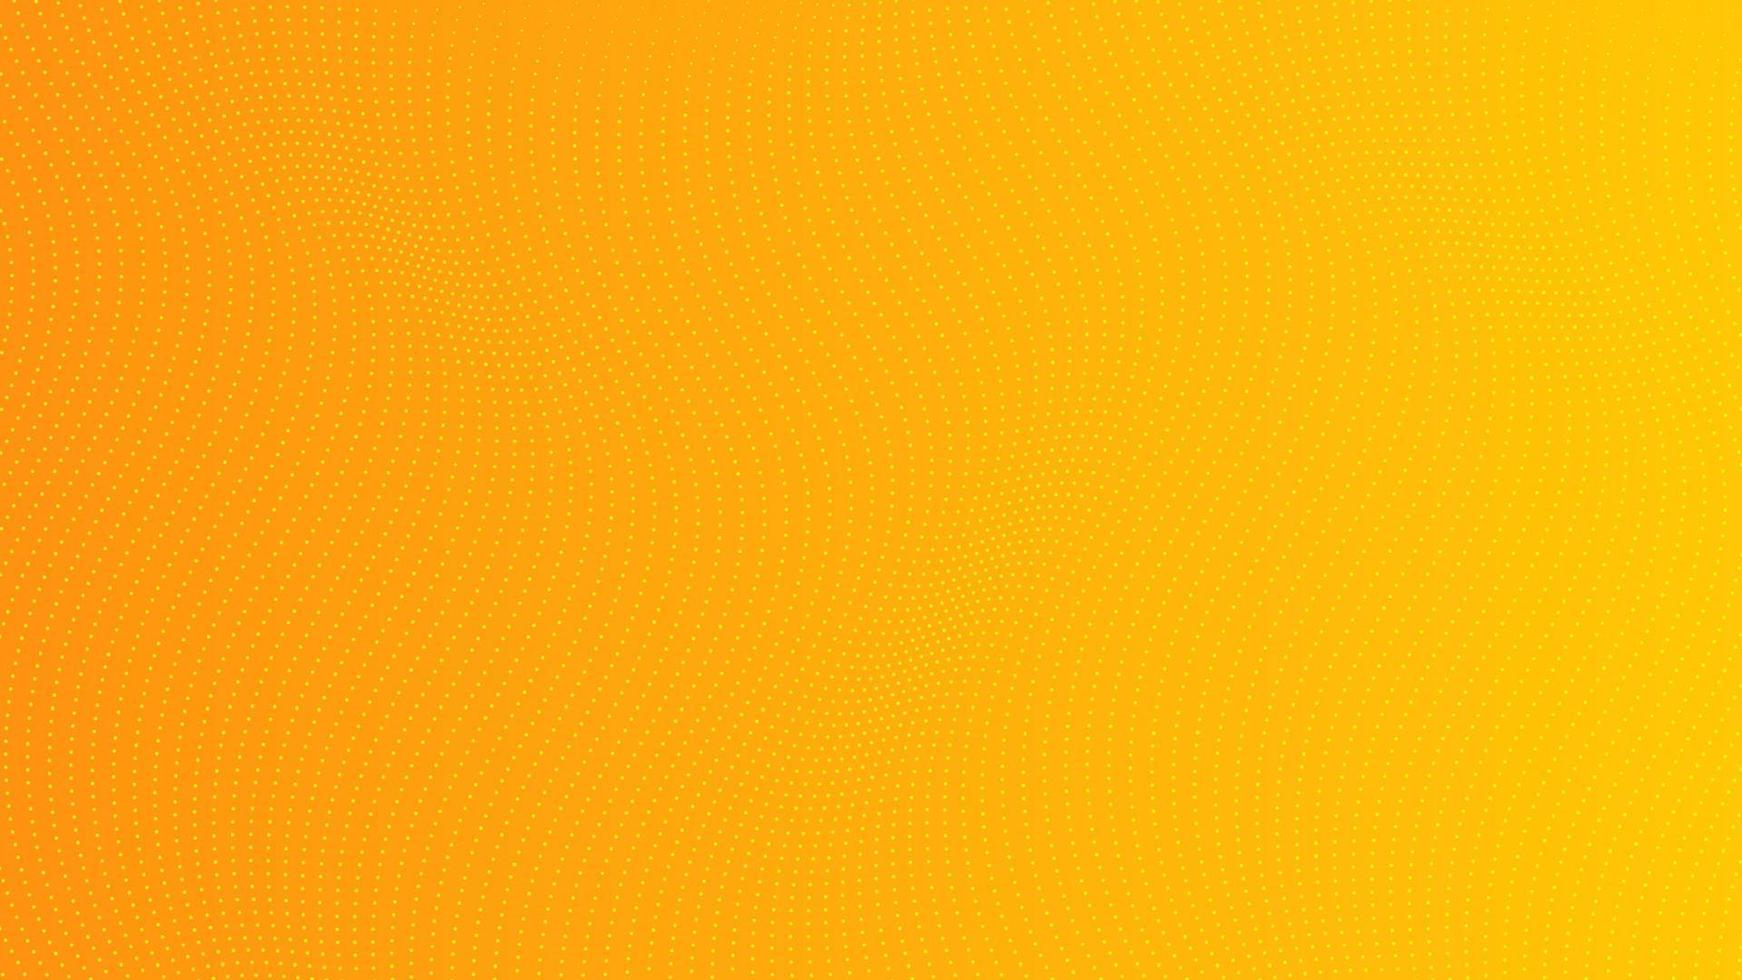 Halftone gradient background with dots. Abstract yellow dotted pop art pattern in comic style. Vector illustration